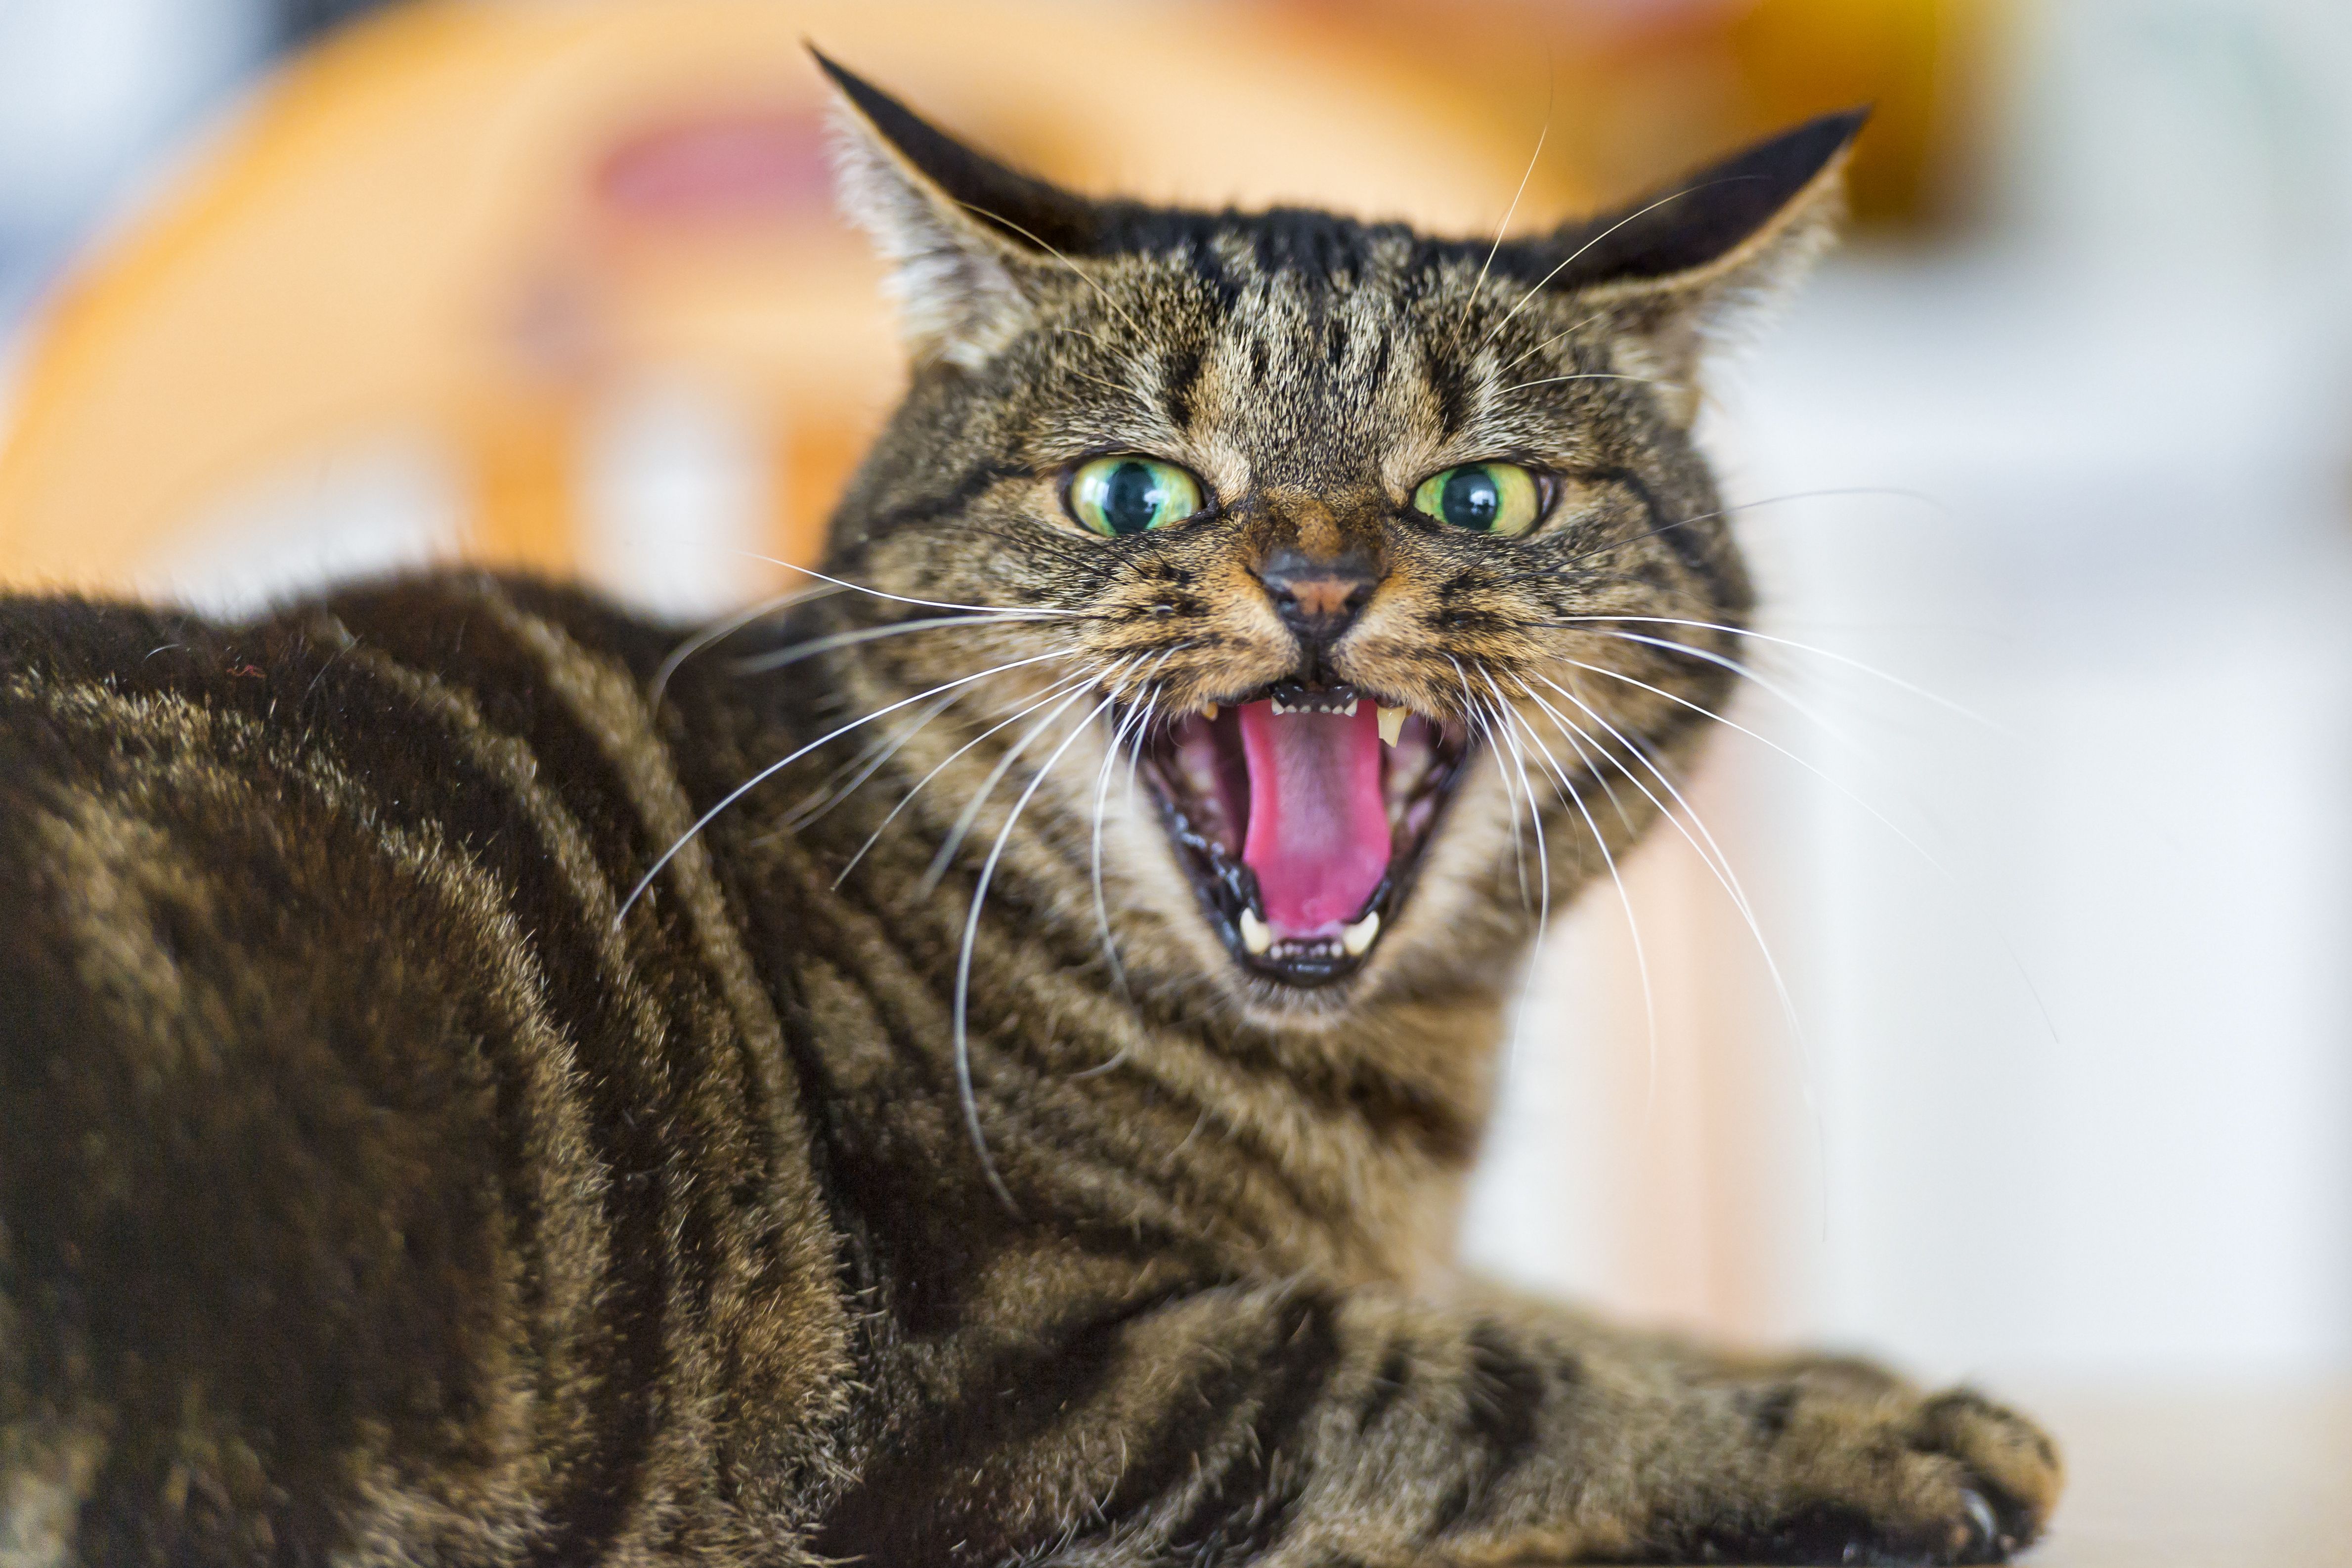 Wallpaper, female, cat, domestic, brown, portrait, angry, openmouth, lying, Zurich, Switzerland, Nikon, d catnipaddicts 4758x3172